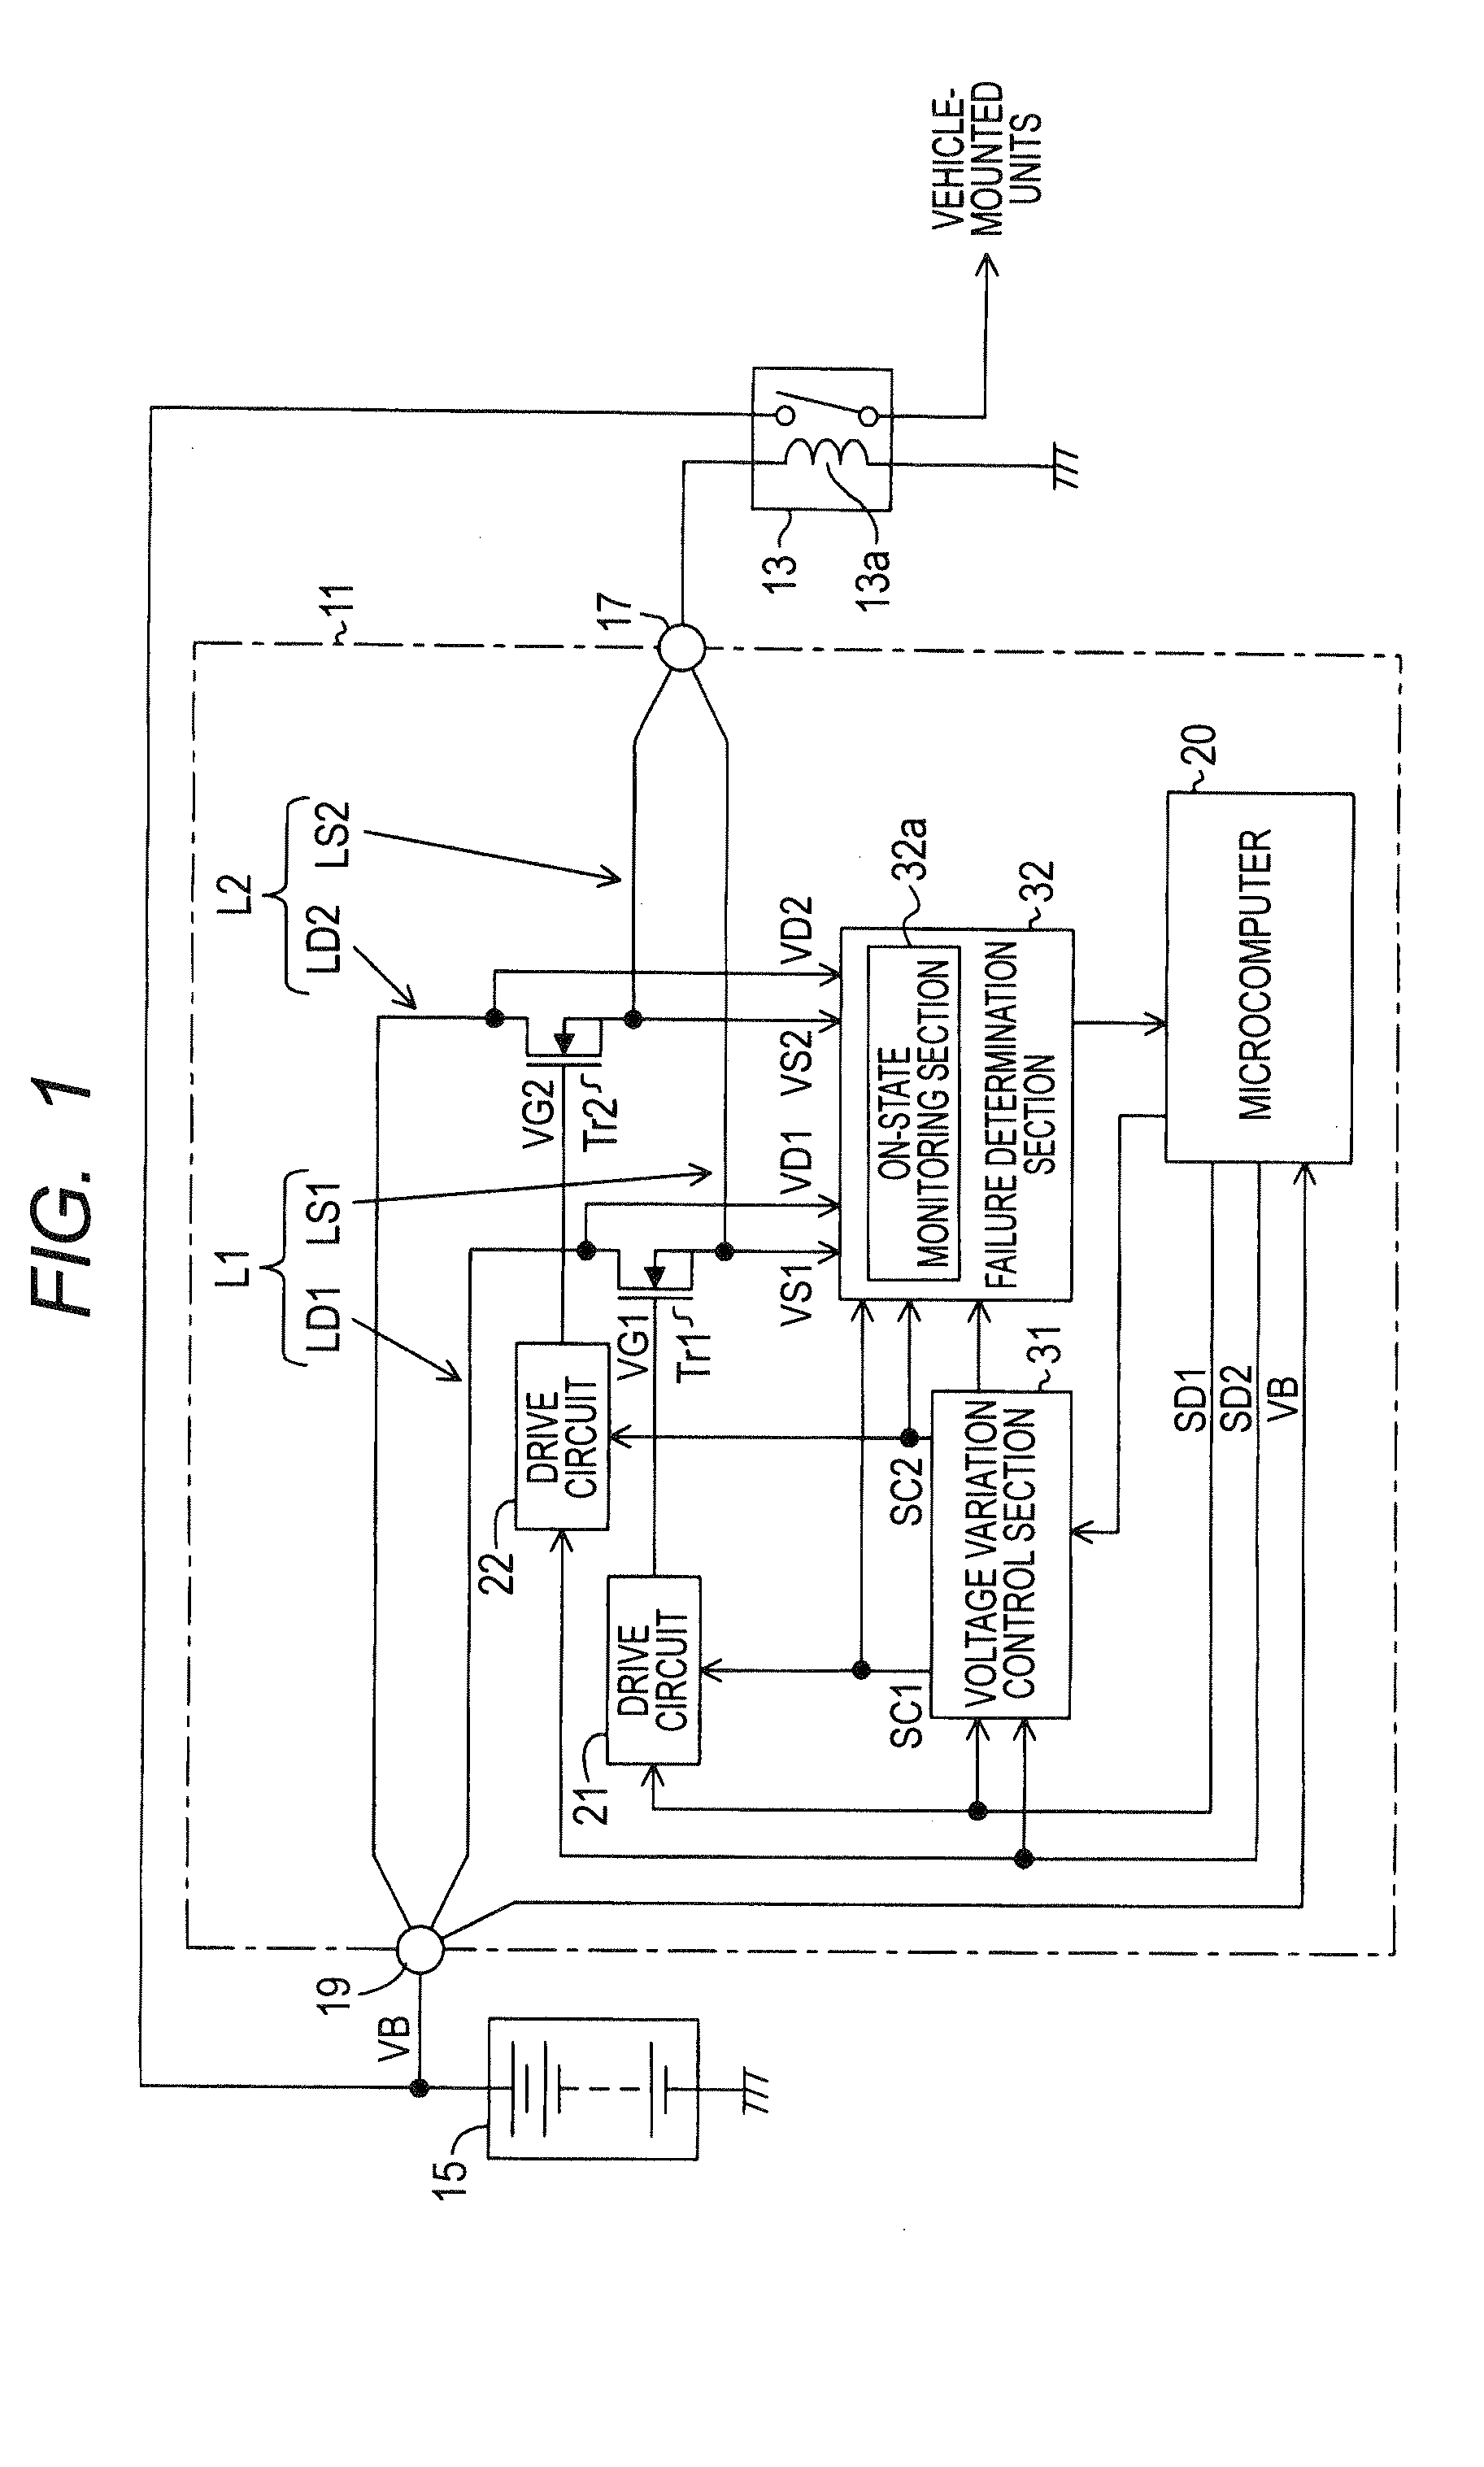 Electrical load driving apparatus